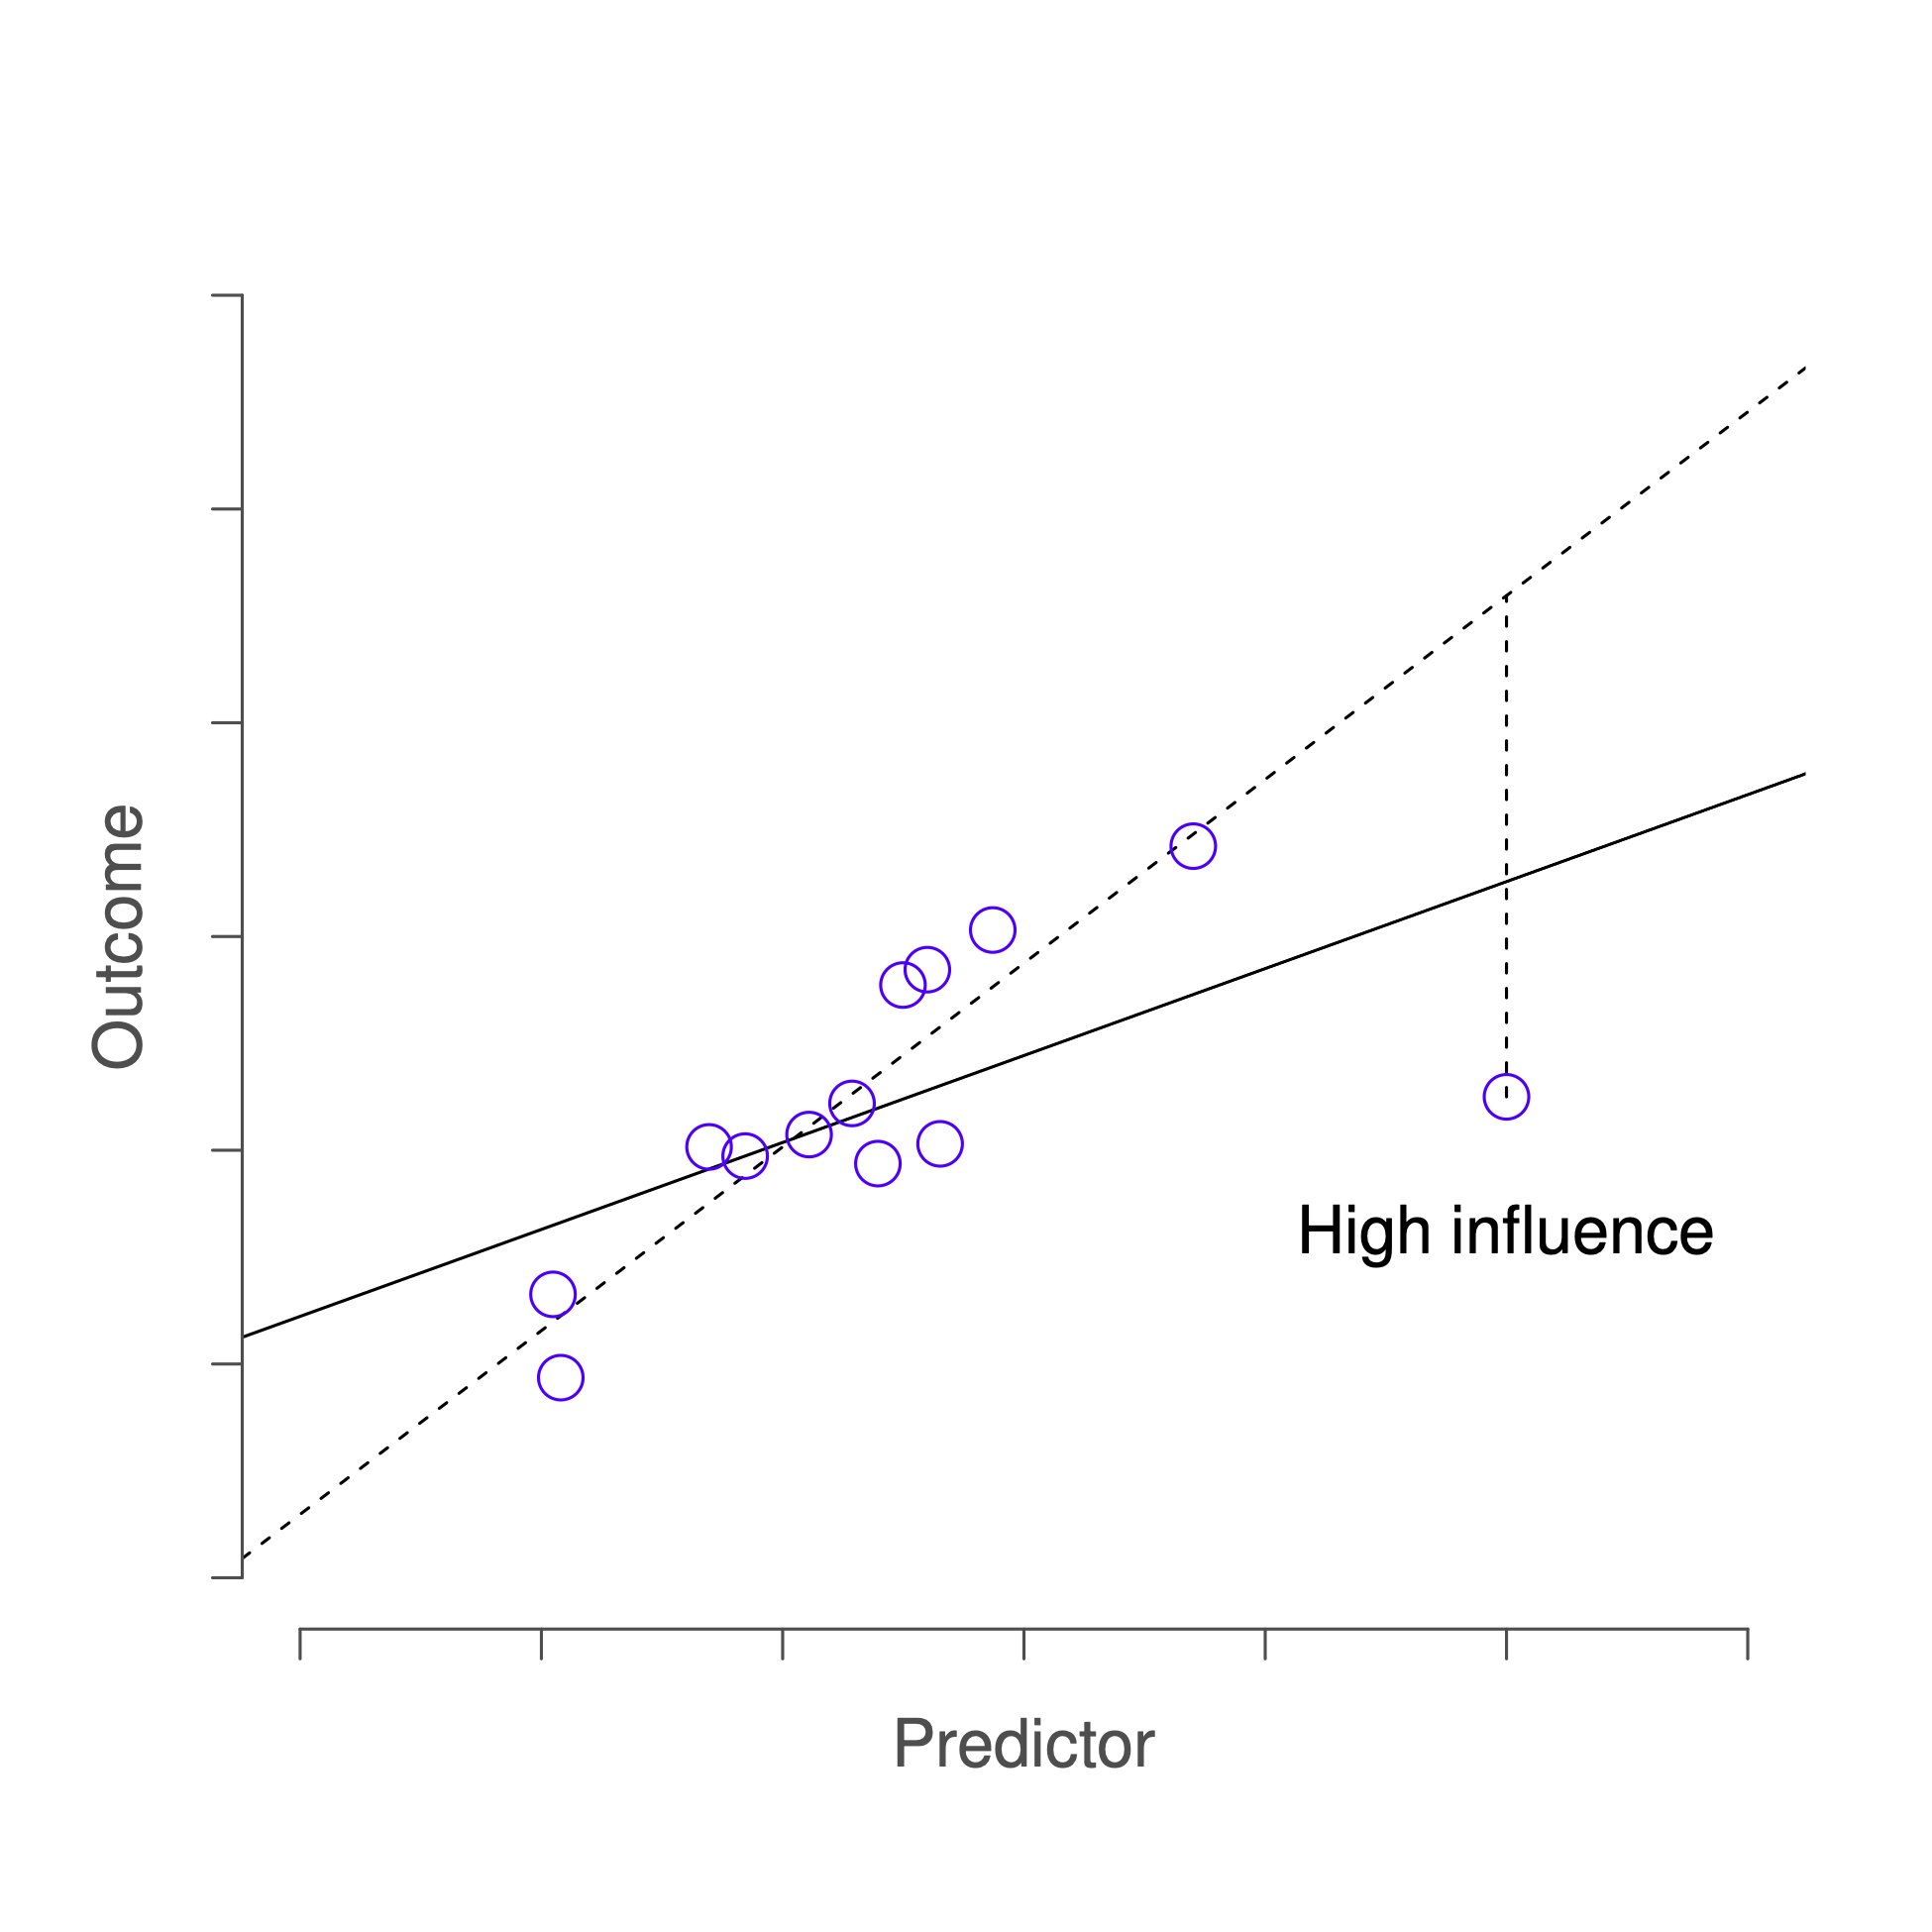 An illustration of high influence points. In this case, the anomalous observation is highly unusual on the predictor variable (x axis), and falls a long way from the regression line. As a consequence, the regression line is highly distorted, even though (in this case) the anomalous observation is entirely typical in terms of the outcome variable (y axis).